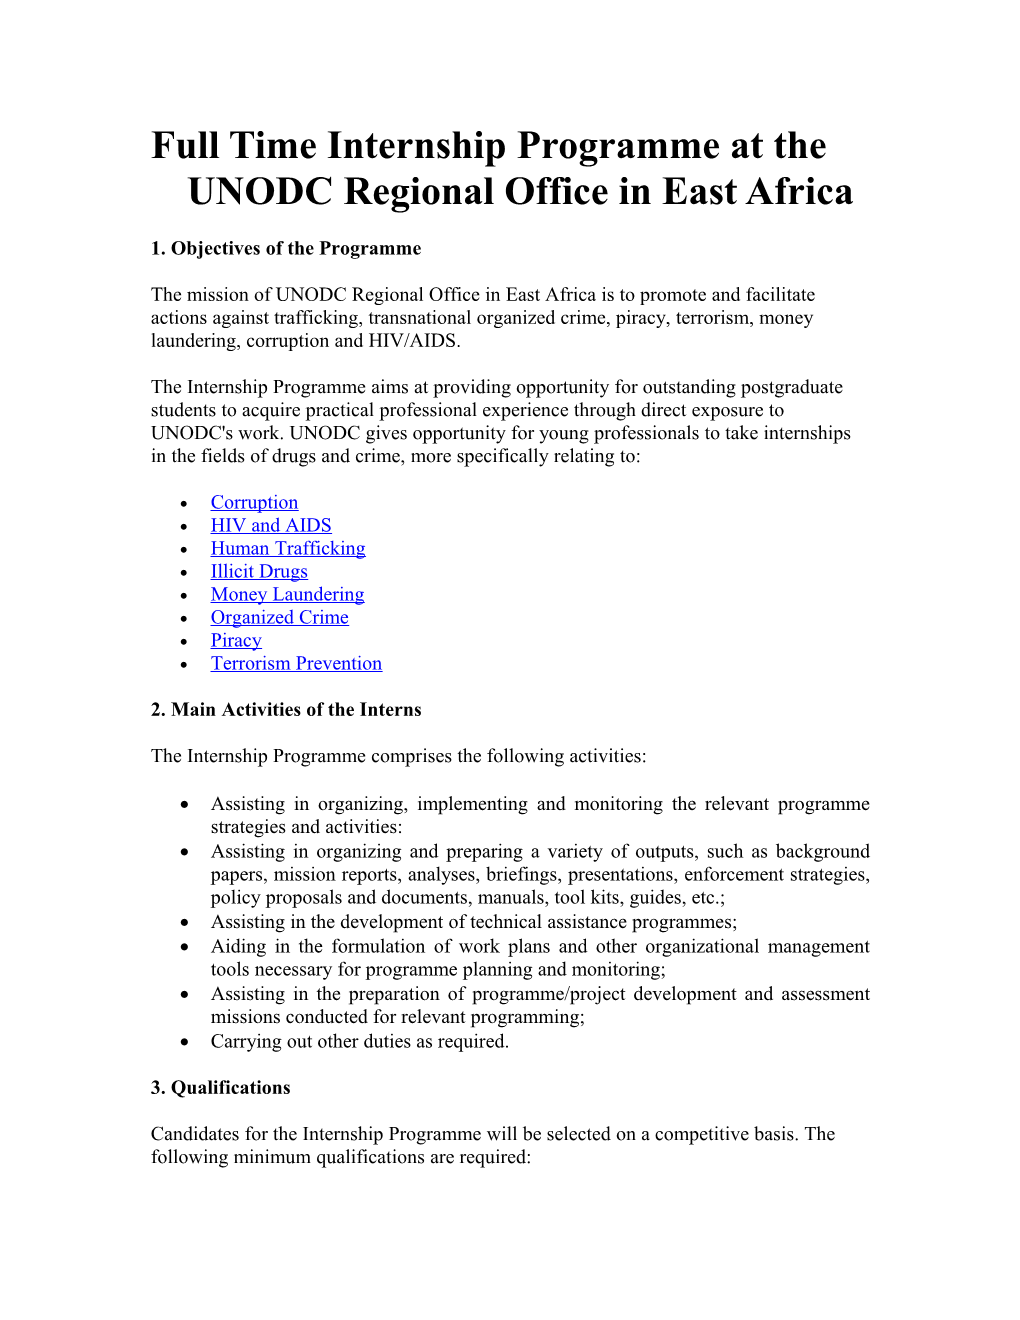 Full Time Internship Programme at the UNODC Regional Office in East Africa